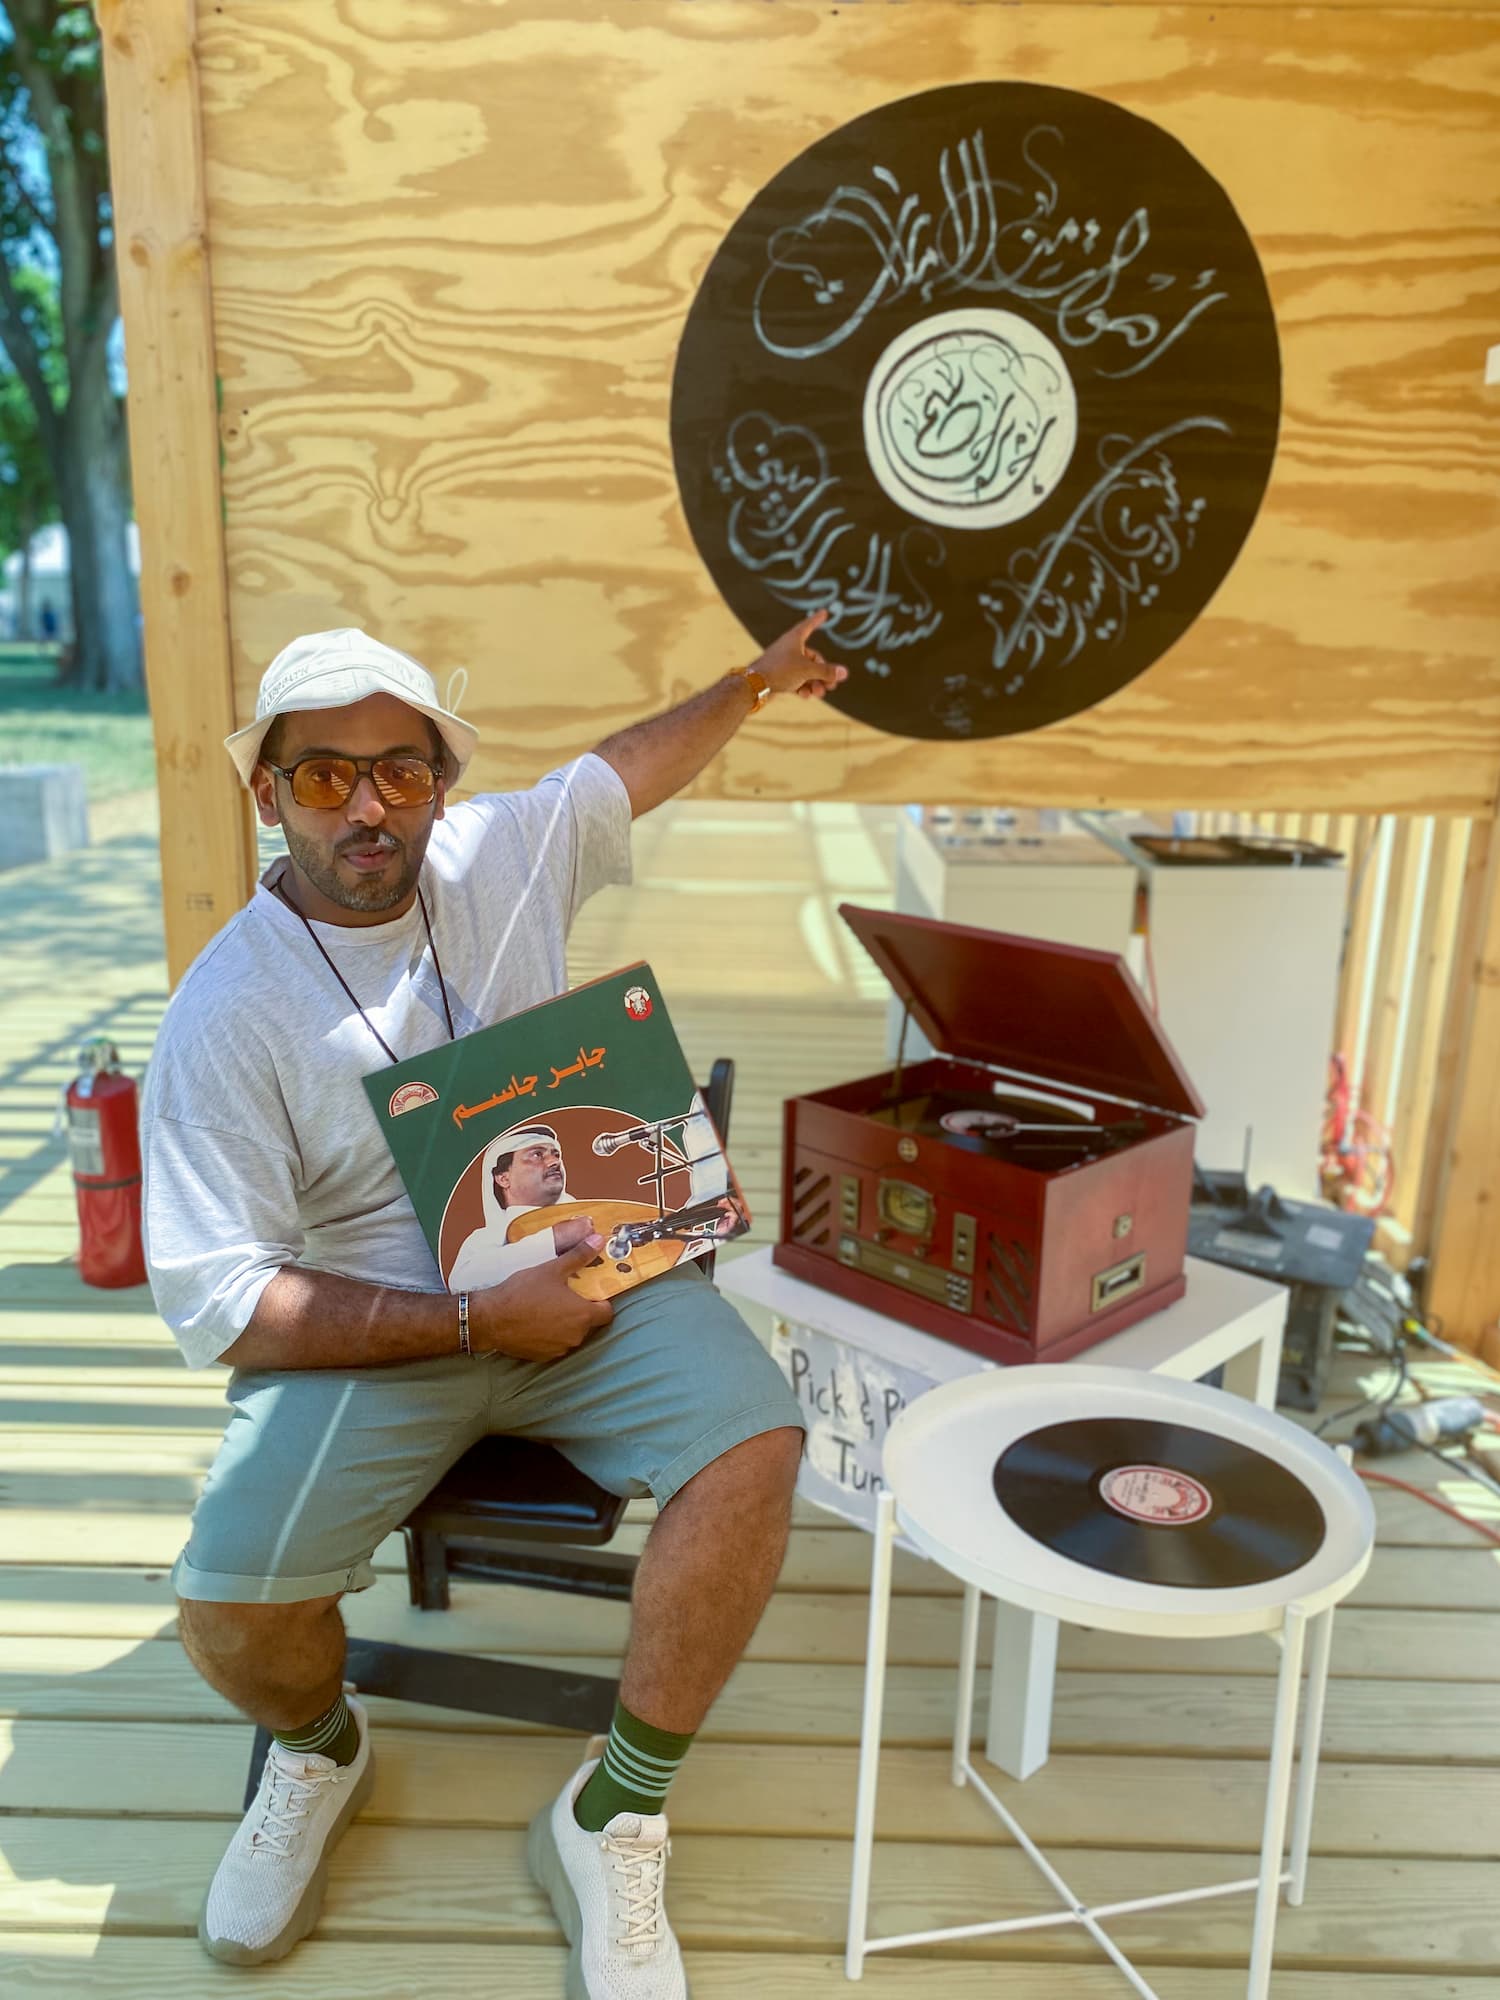 Mohamed Jneibi sitting next to an old vinyl record player